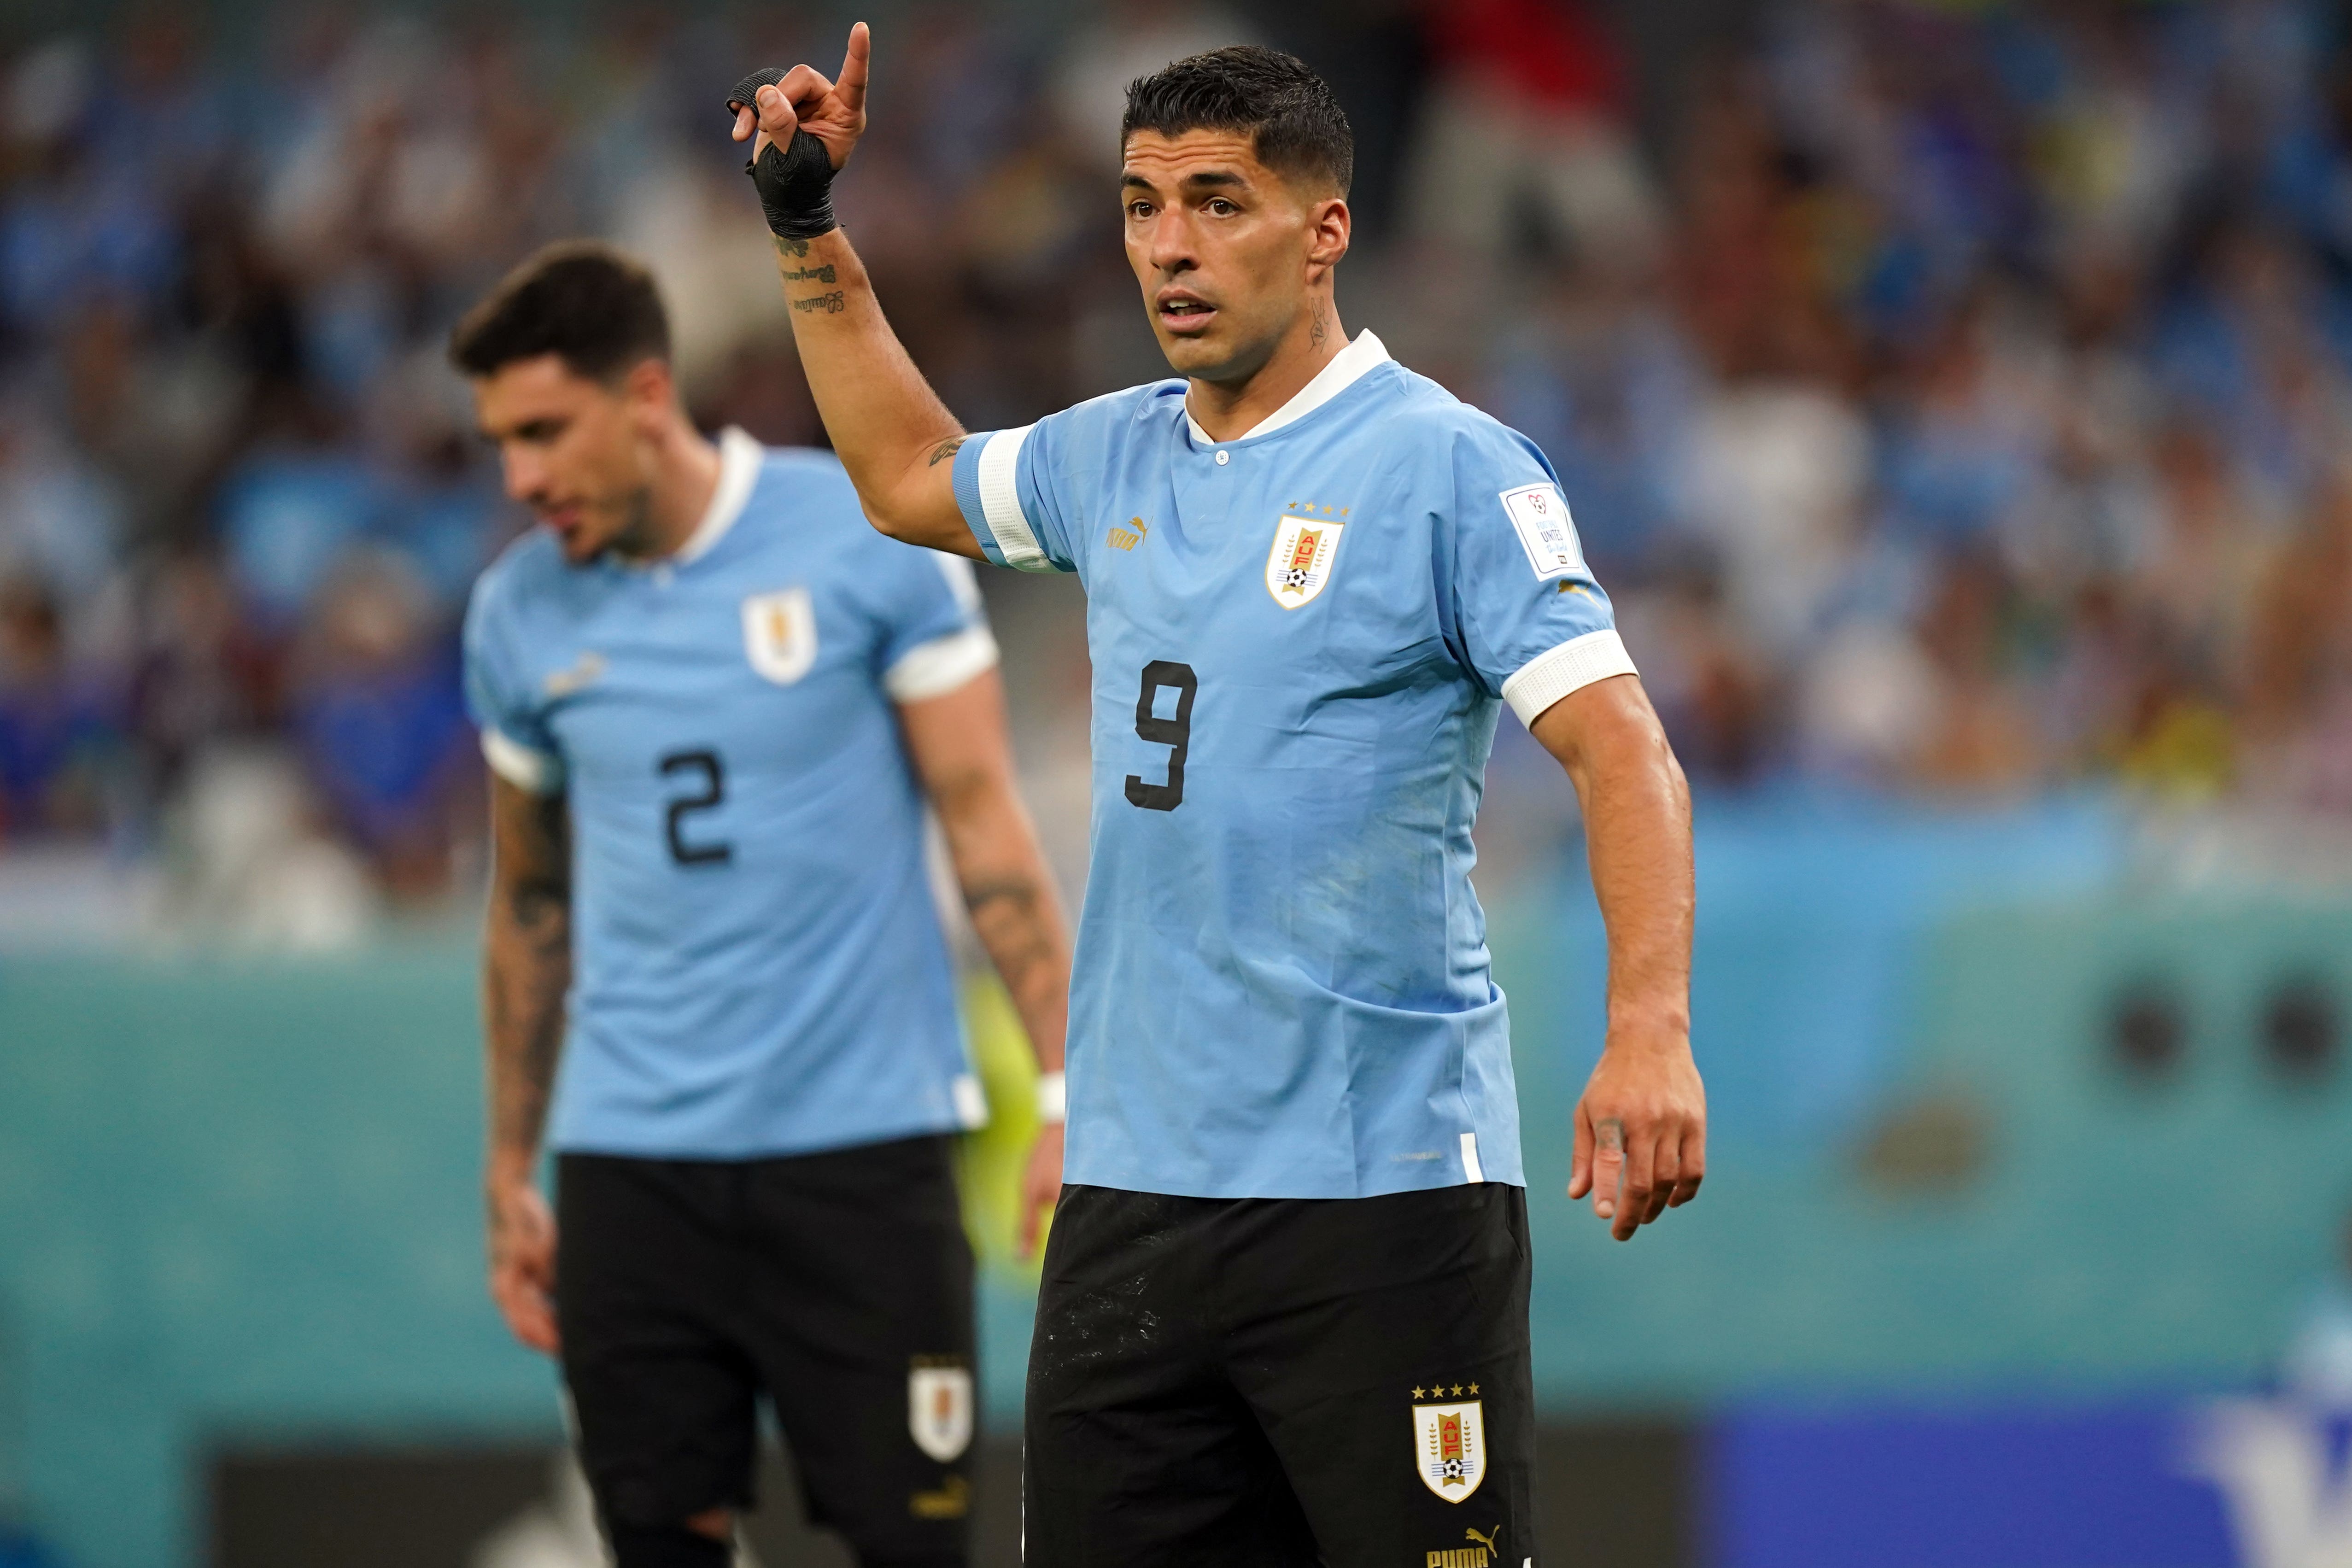 Luis Suarez looked a shadow of his former self in Uruguay’s draw with South Korea